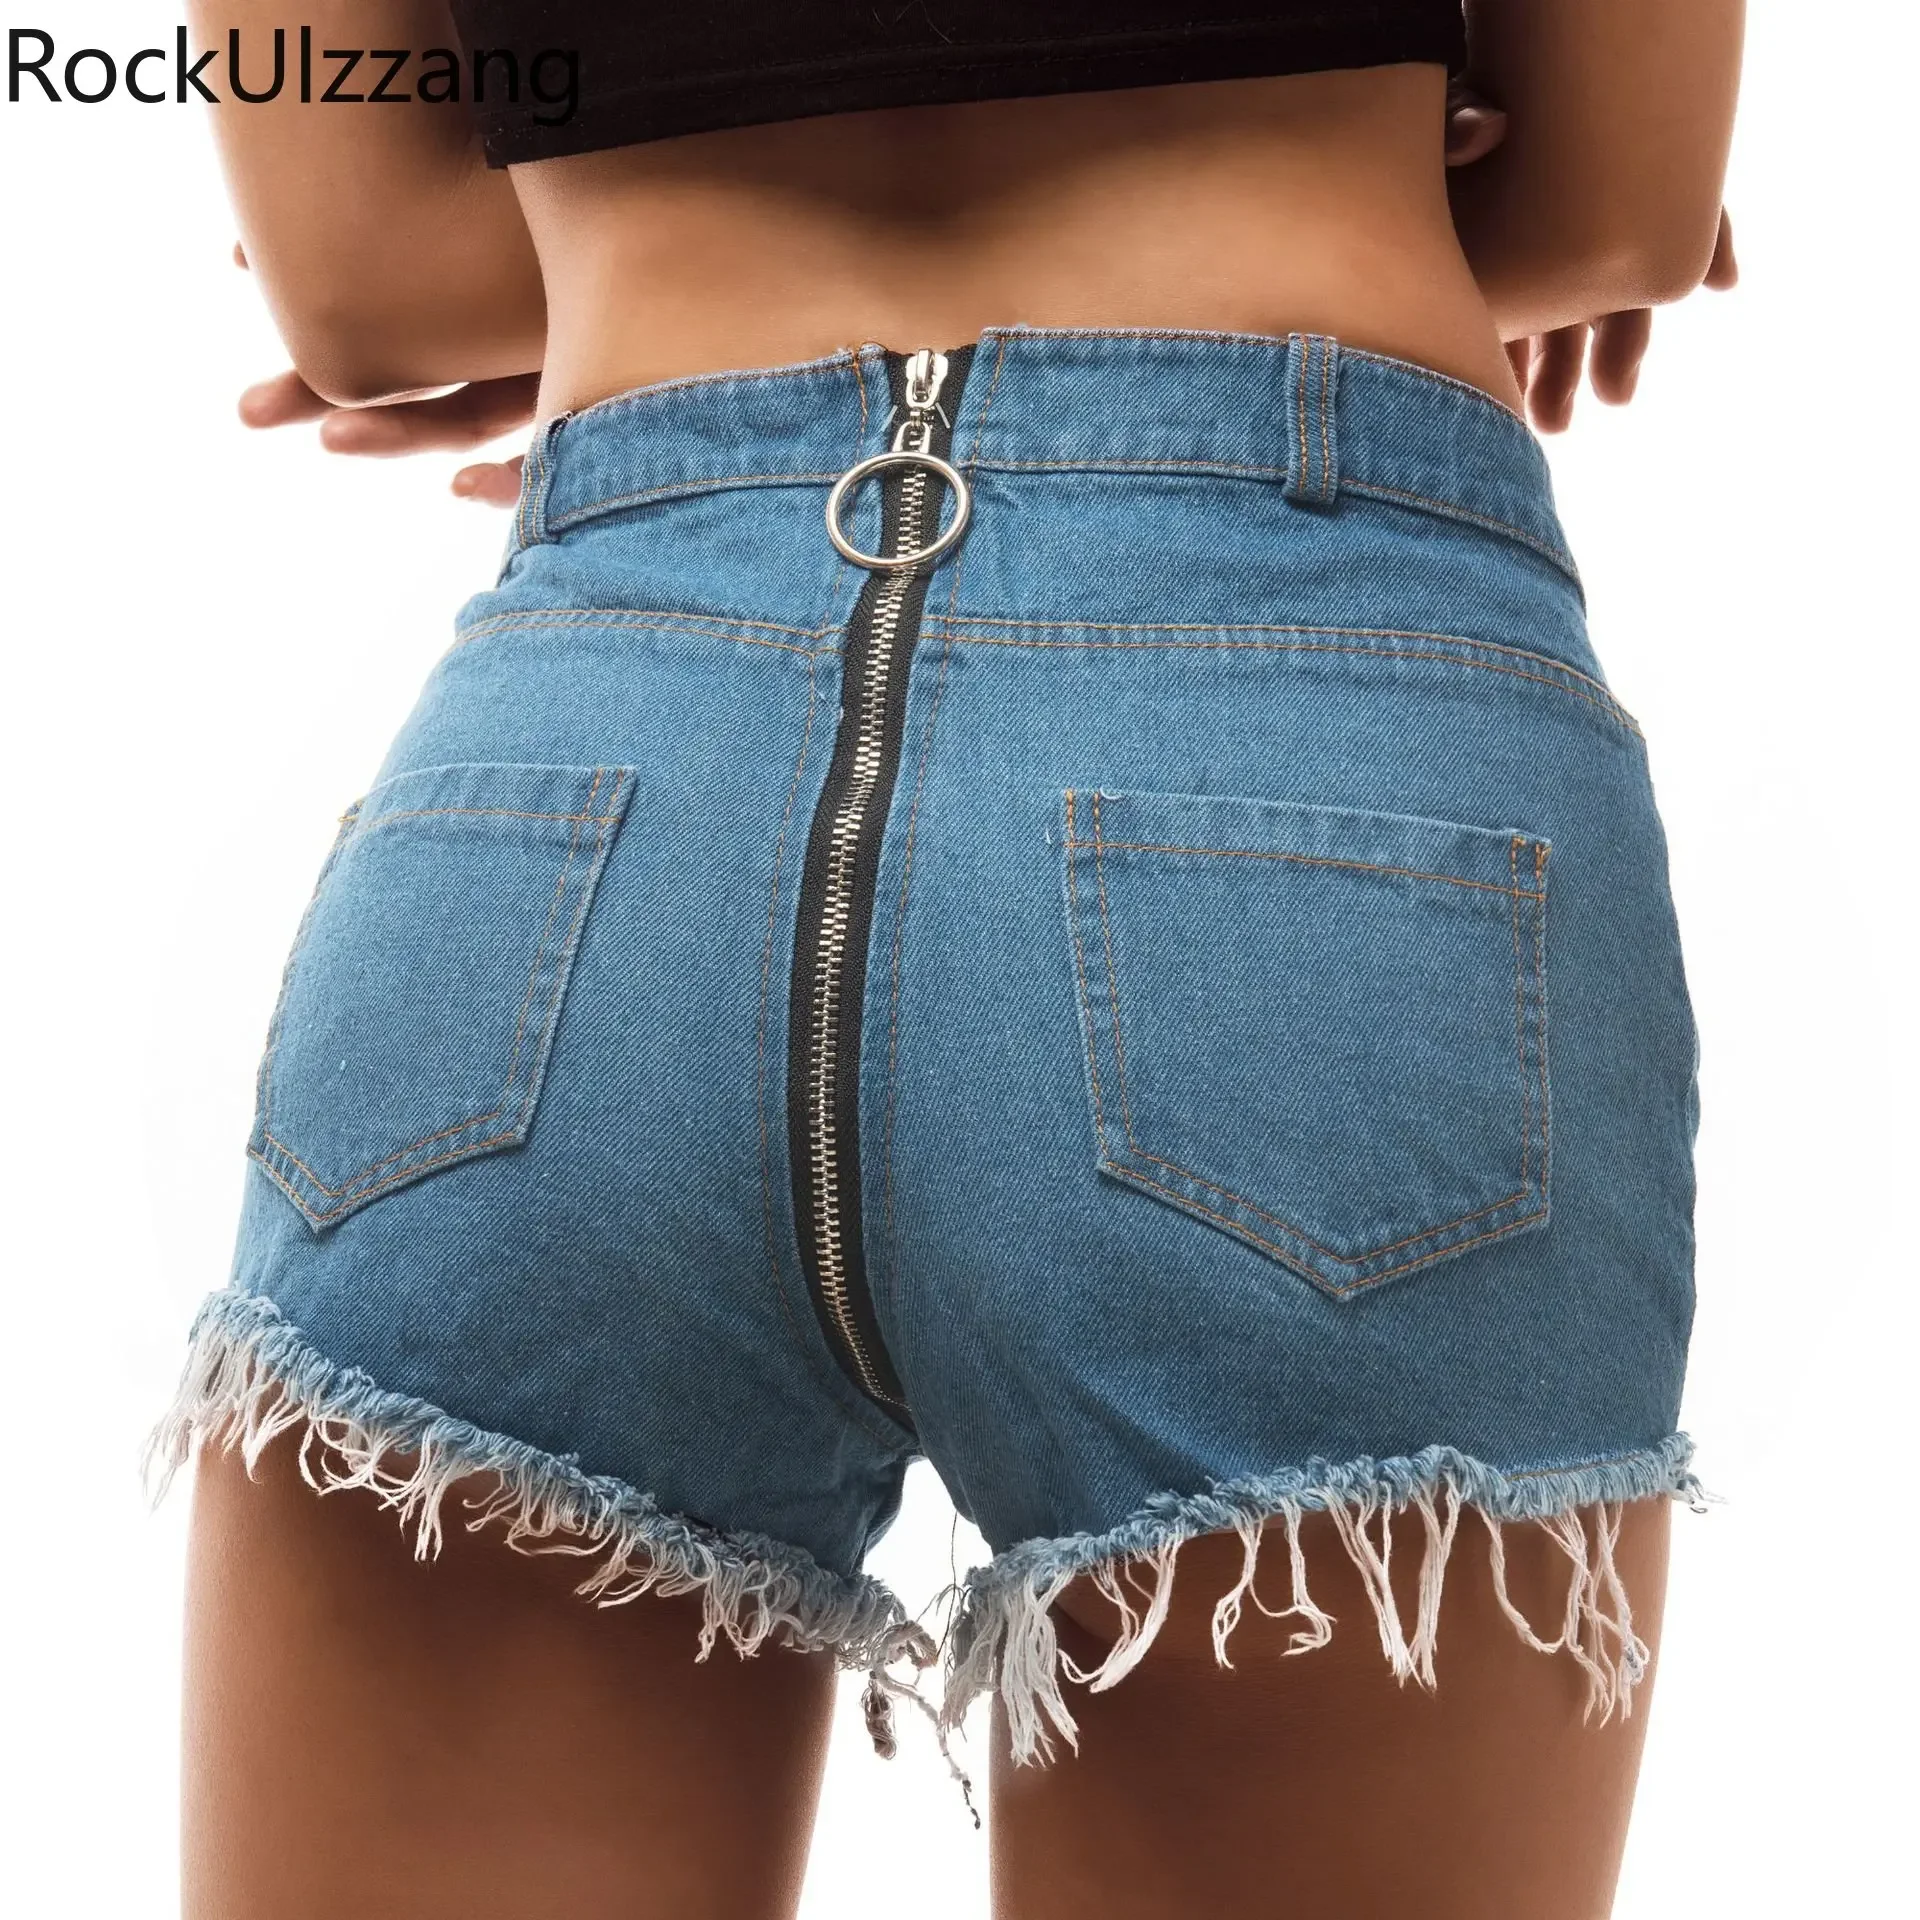 

Jeans Denim Shorts with Open Crotch Zip Up Crotchless Hotpant Sexy Skinny Tight Ripped Hole Short women club booty grunge y2k